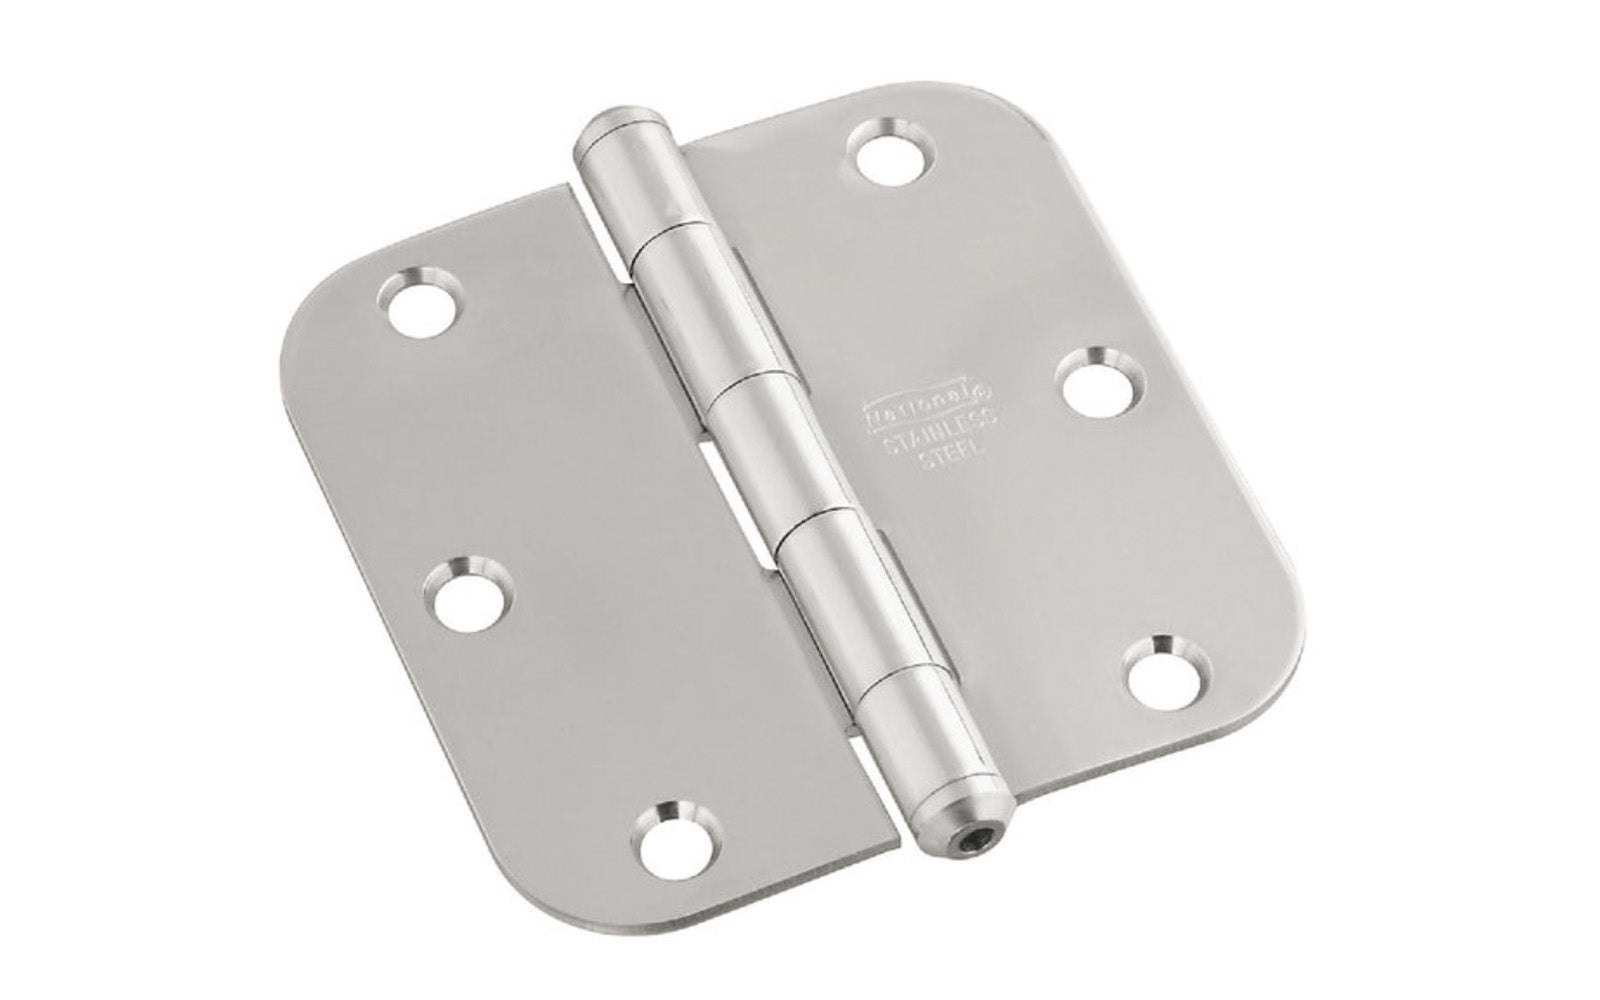 3-1/2" Stainless Door Hinge - 5/8" Radius. Made of stainless steel material, 300 series for maximum corrosion resistance. Nob on hinge for finished appearance with square corners. Non-rising pin. Screw holes are countersunk. Sold as single hinge in pack.  National Hardware Model No. N225-961. 038613225961